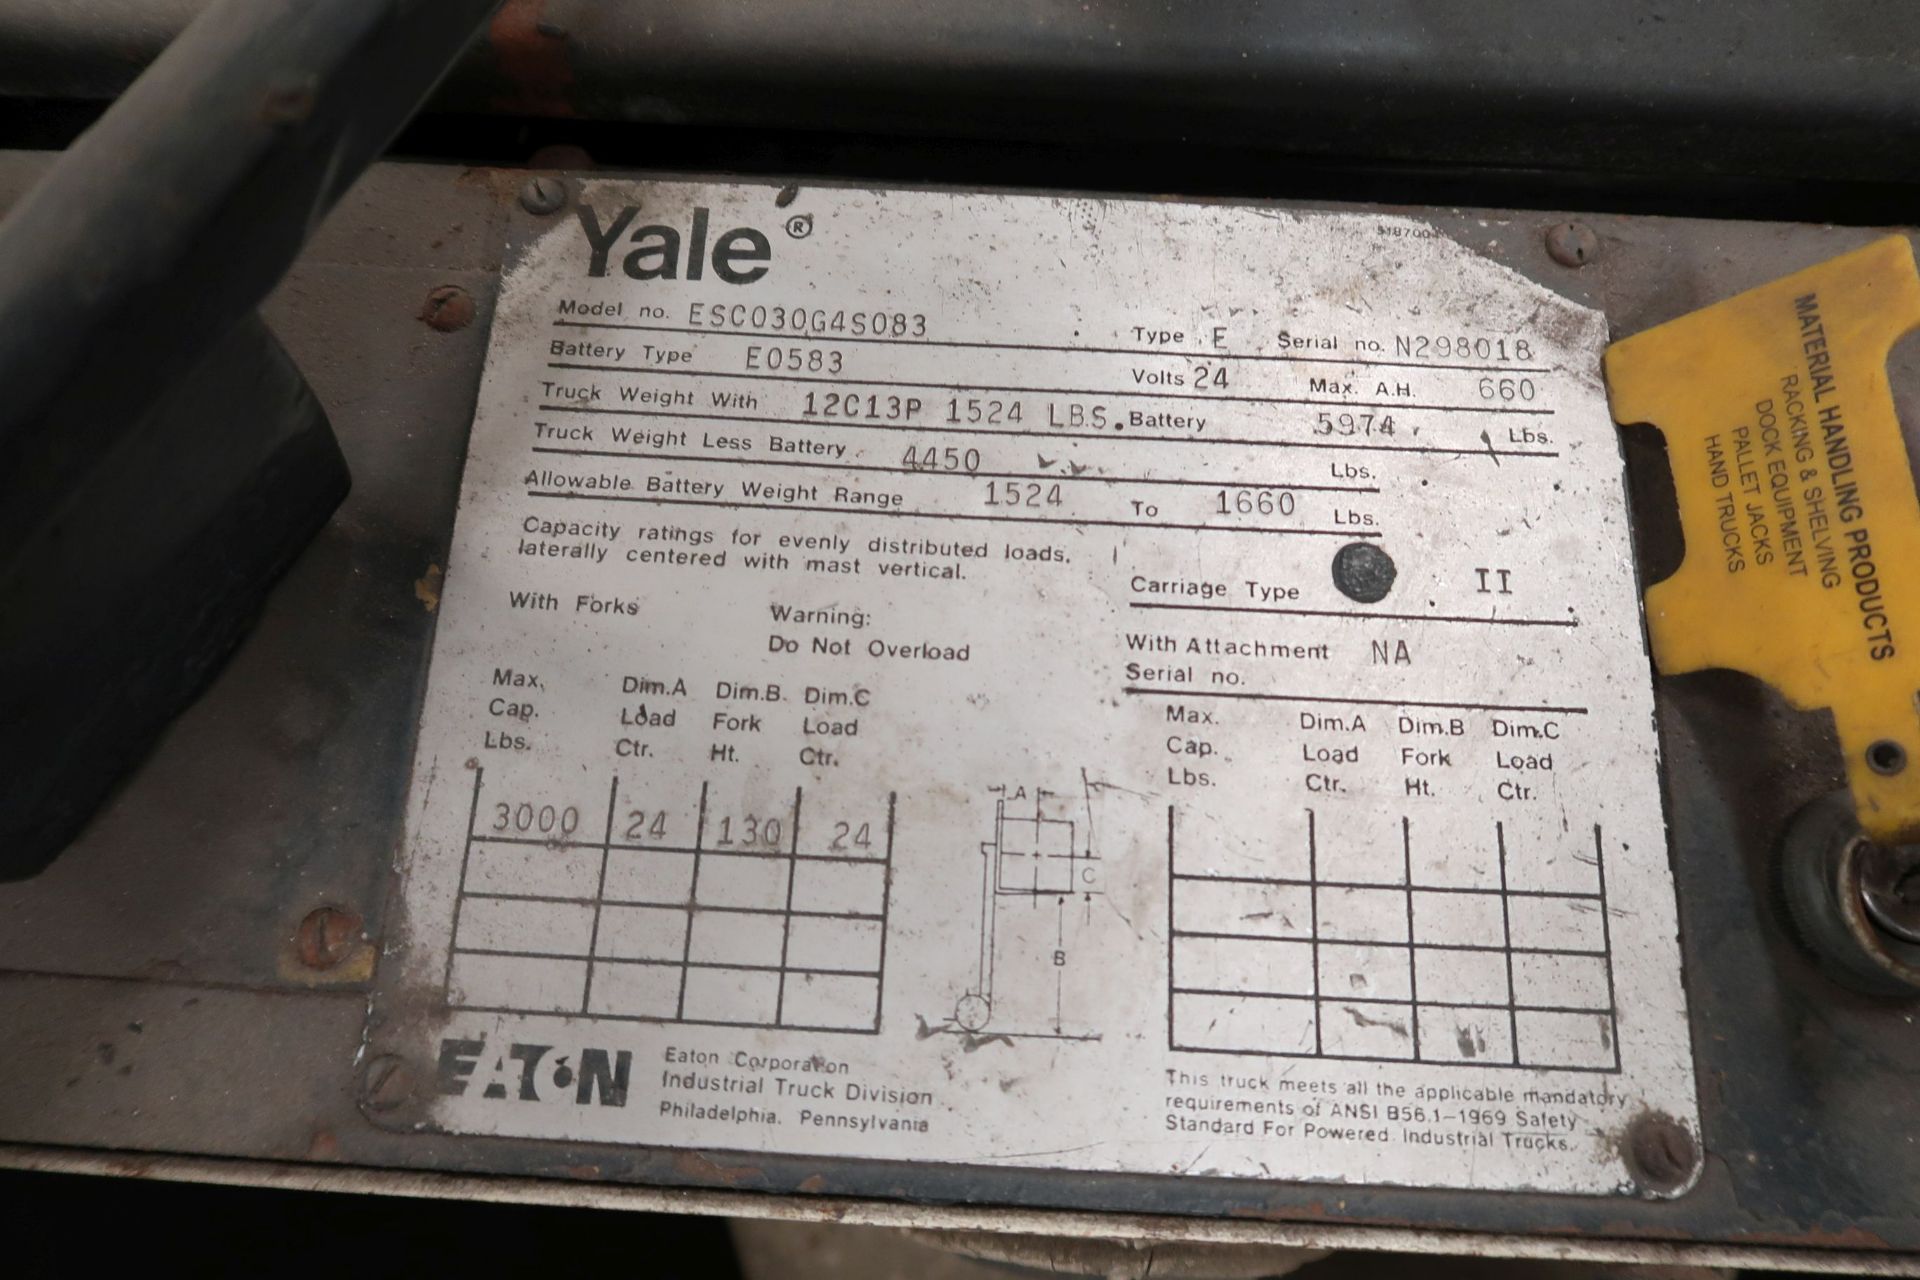 YALE ESC030 STAND-UP ELECTRIC LIFT TRUCK, OUT OF SERVICE - Image 3 of 4